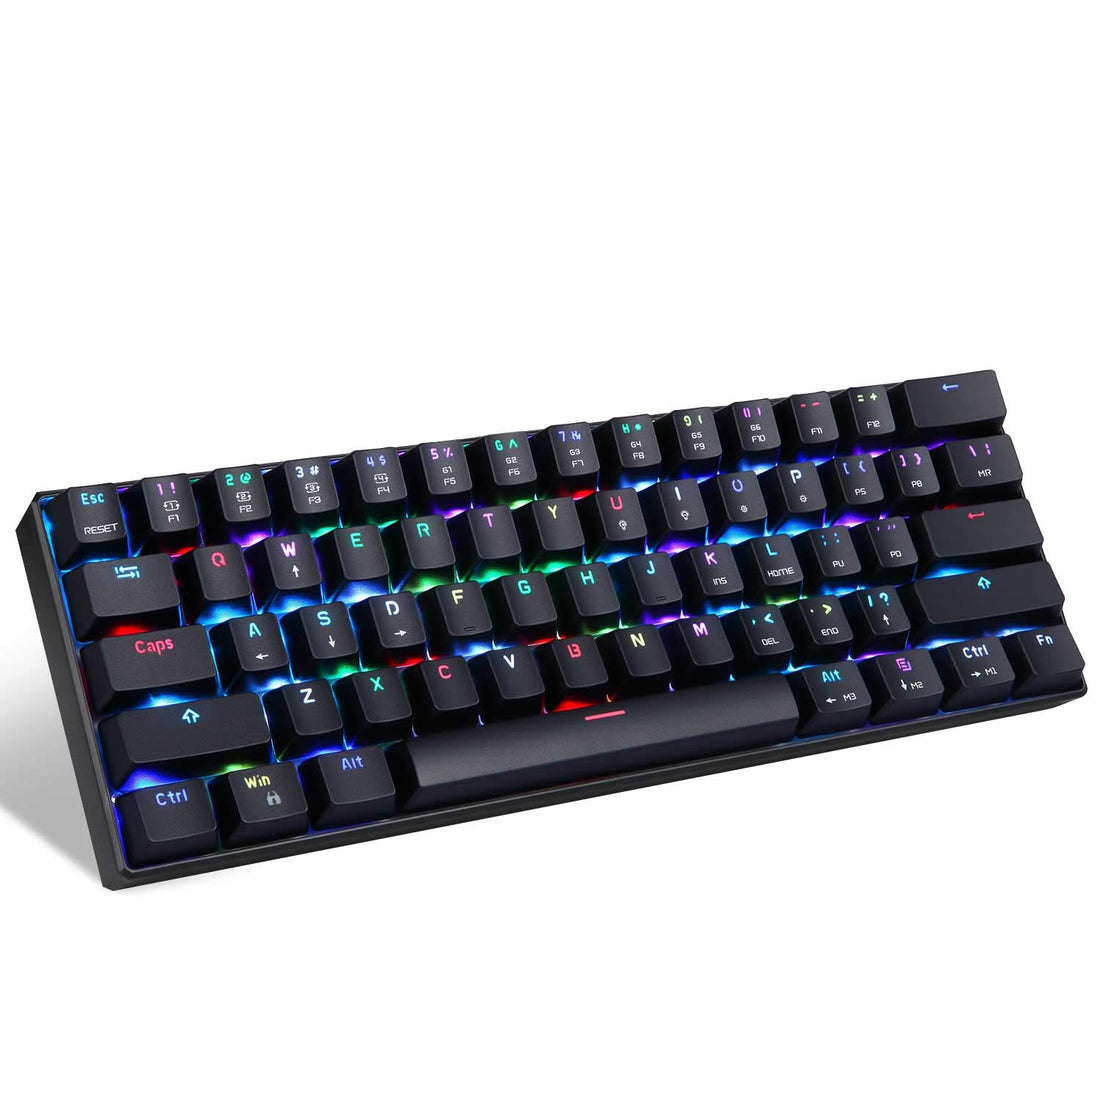 MOTOSPEED CK61 60% Mechanical Keyboard Portable 61 Keys RGB LED Backlit Type-C USB Wired Office/Gaming Keyboard for Mac, Android, Windows (Blue Switch) (MSCK61-blue Switch)